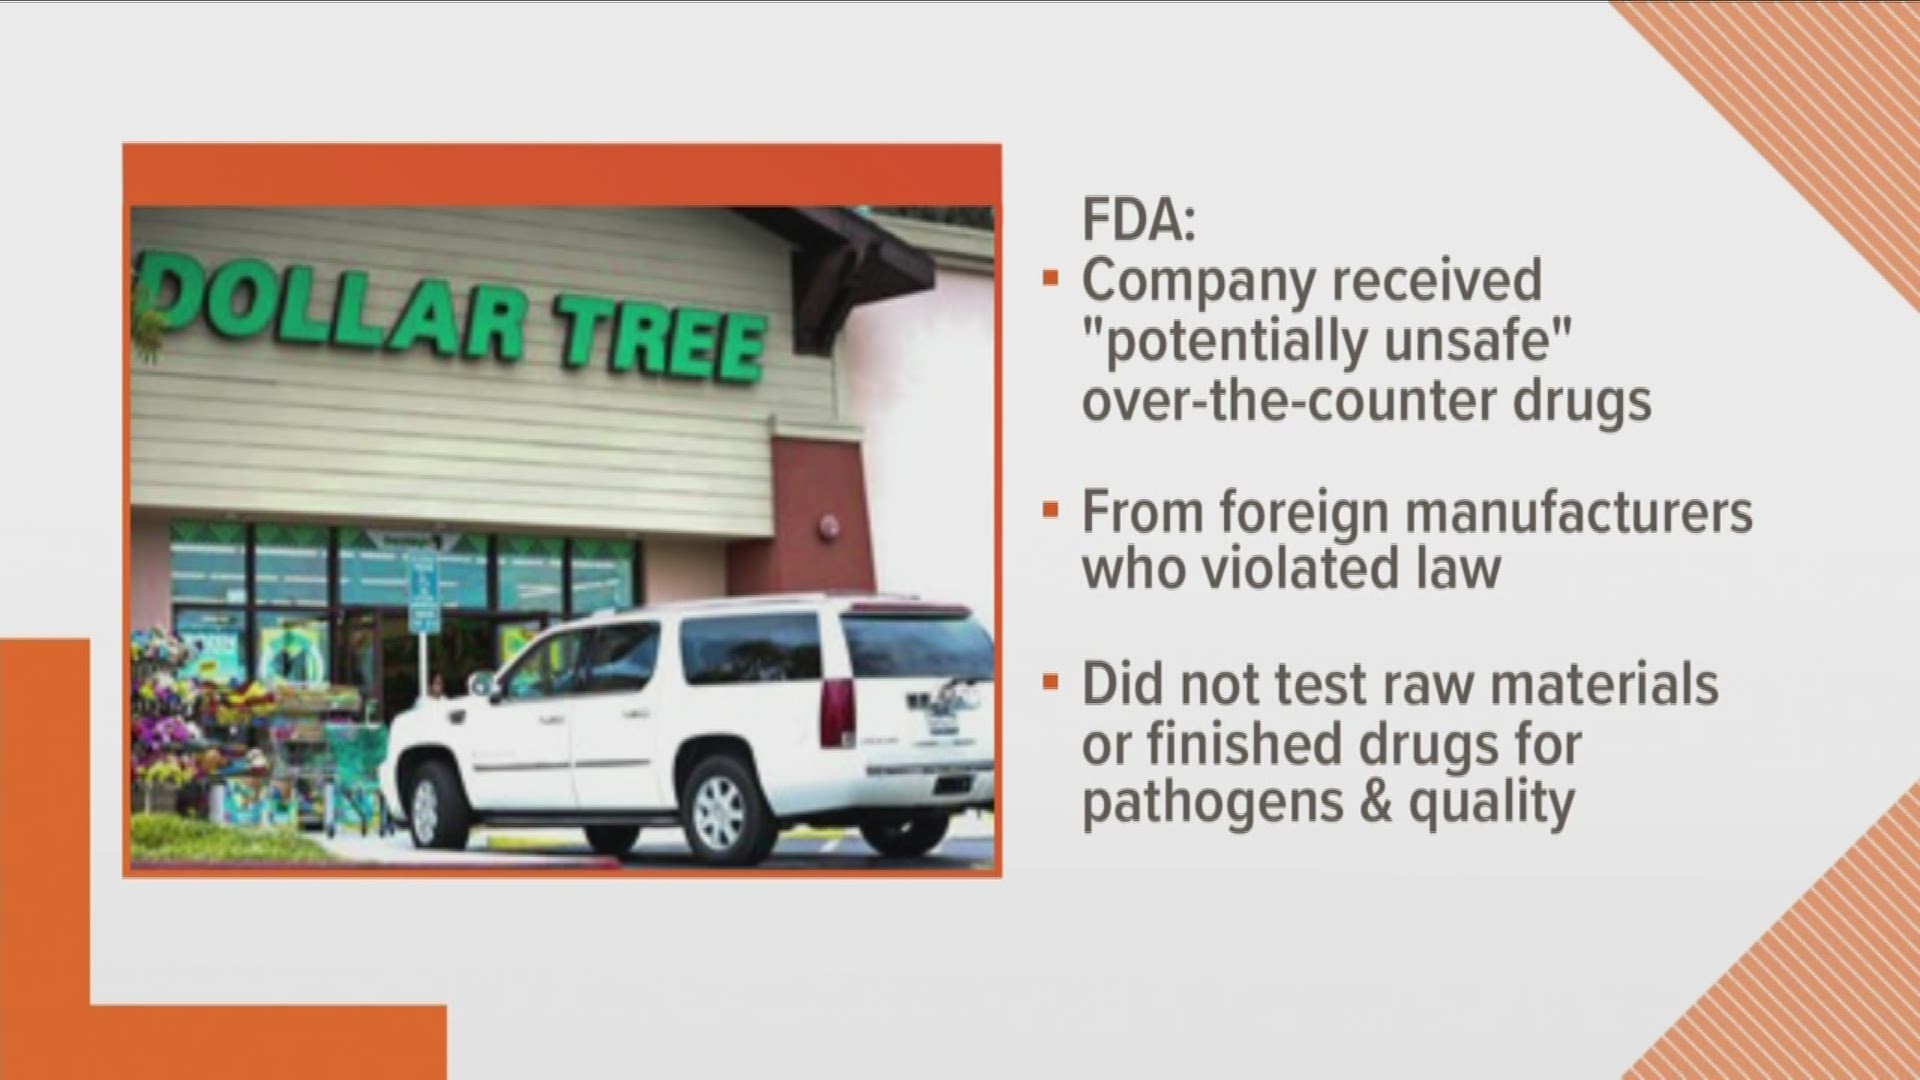 The warning relates to Dollar Tree's "Assured" brand over-the-counter drugs along with other drug products.